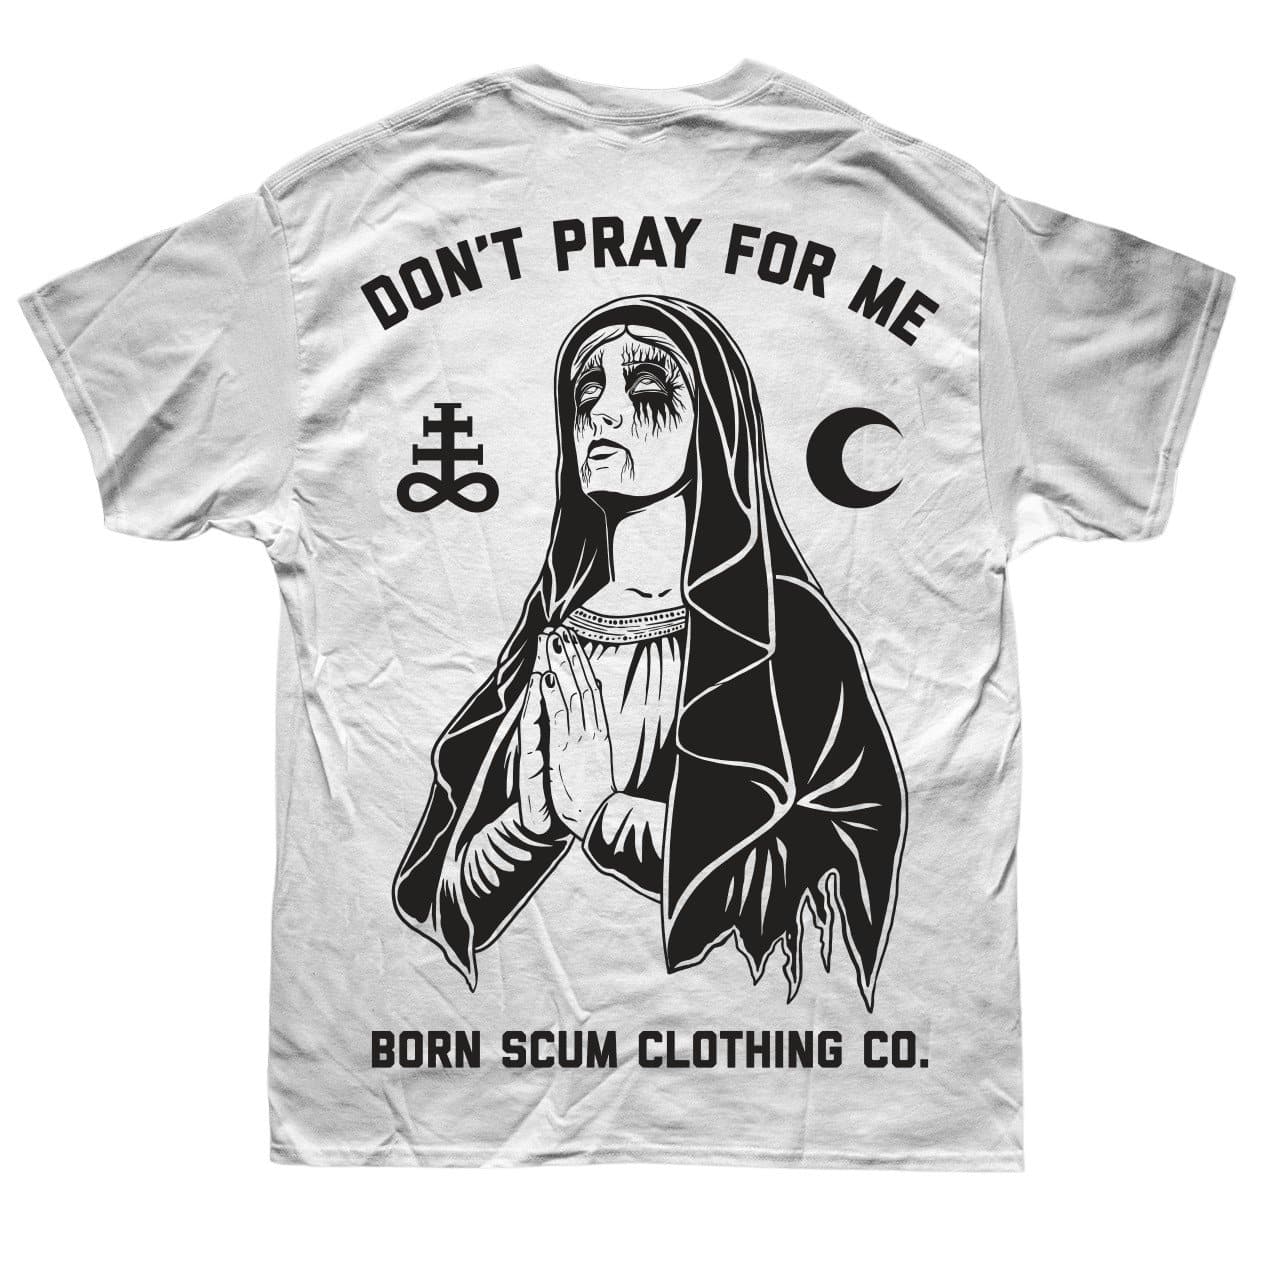 DON'T PRAY FOR ME LIMITED T-SHIRT - Born Scum Clothing Co